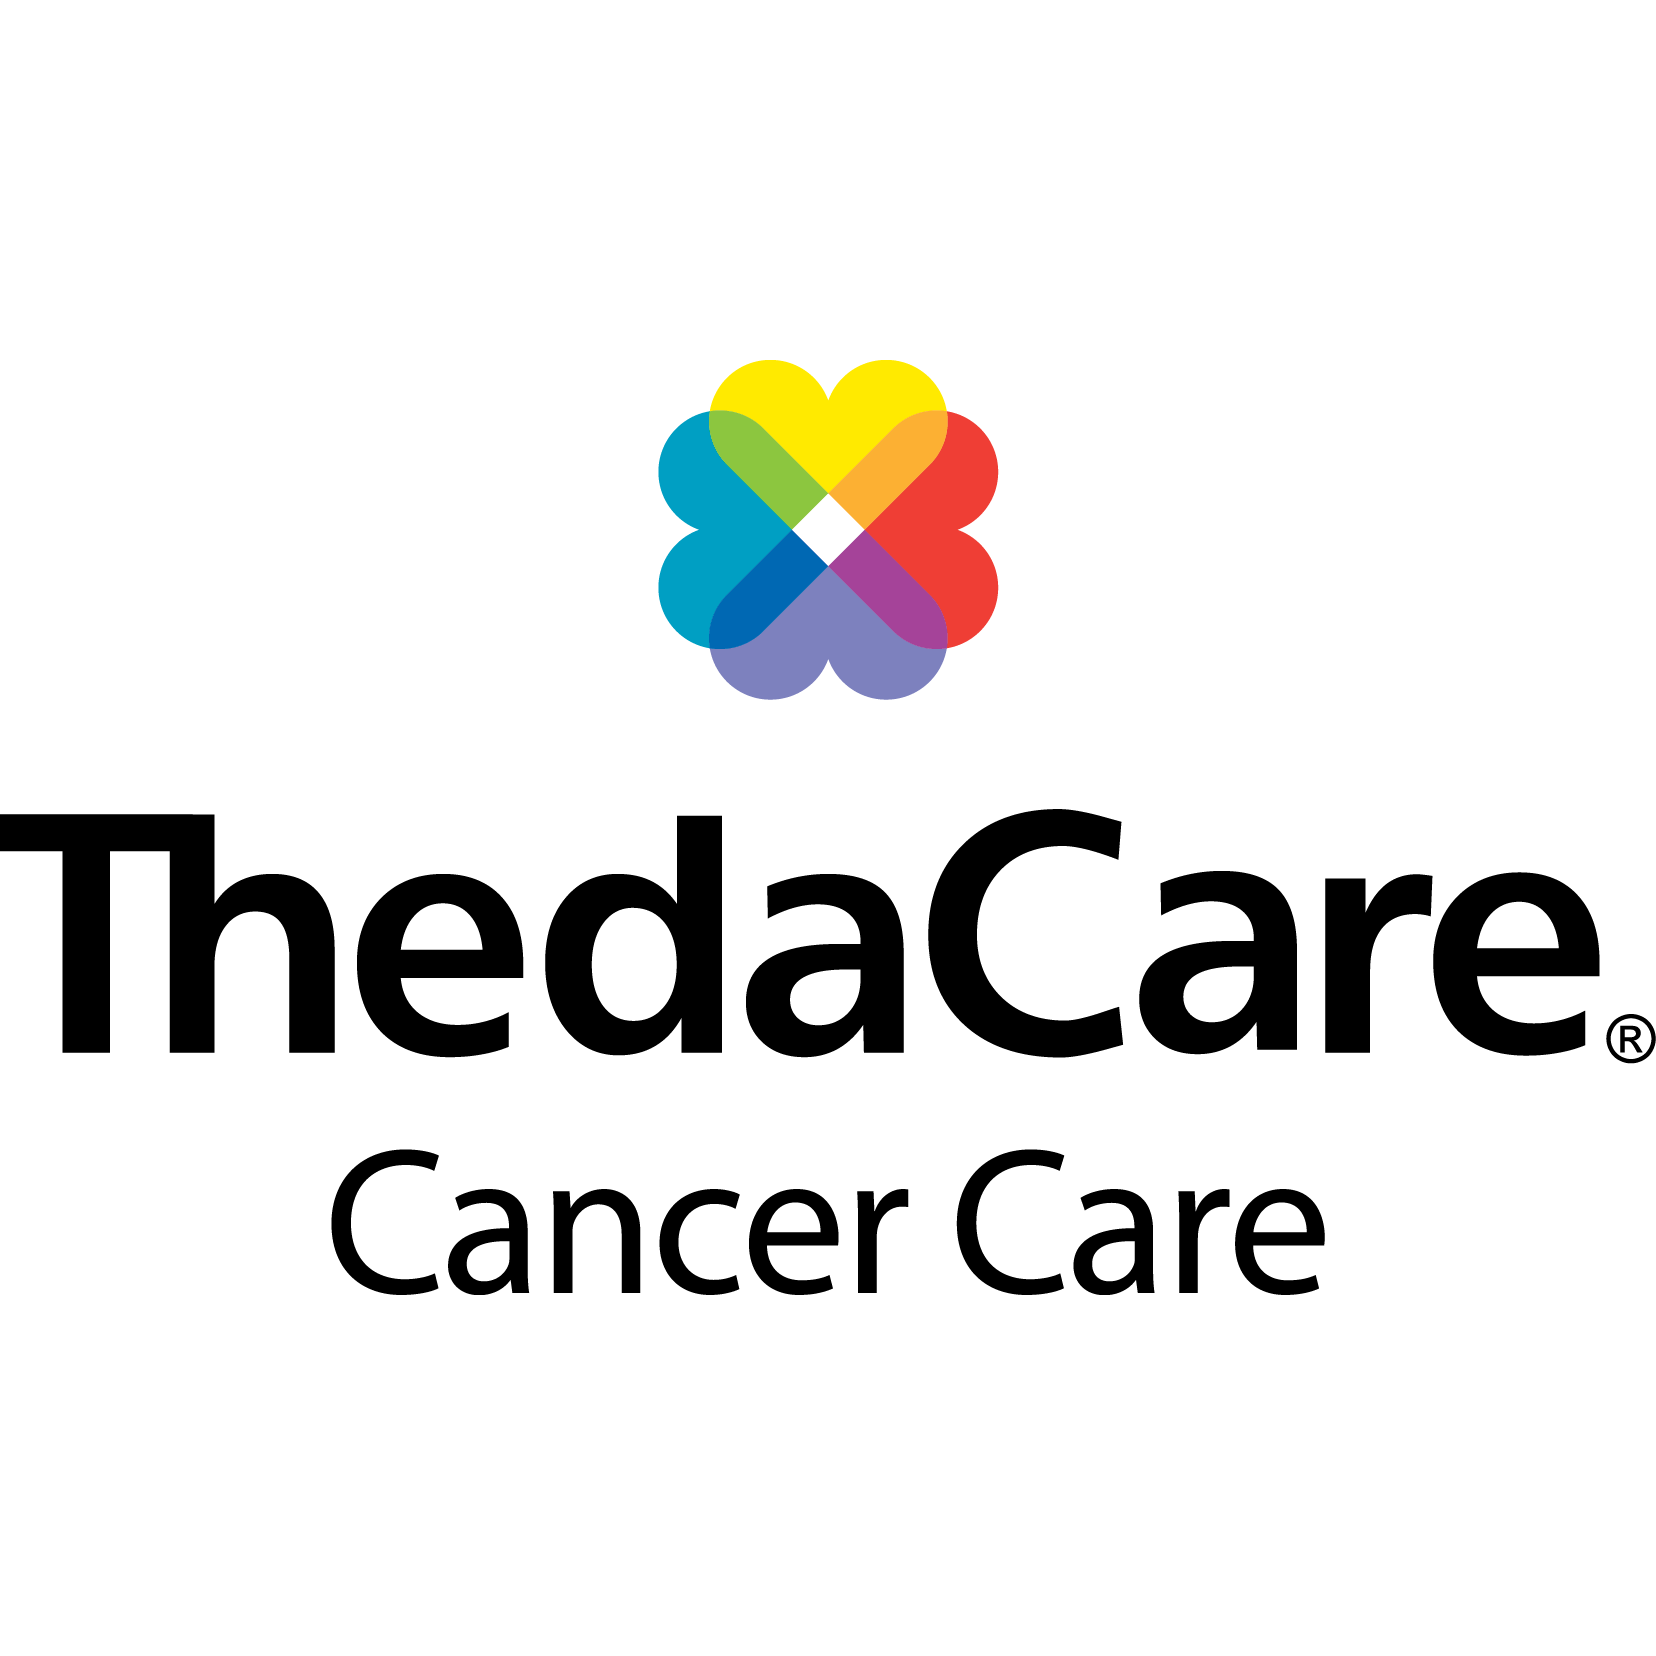 ThedaCare Cancer Care-Neenah - Neenah, WI 54956 - (920)364-3600 | ShowMeLocal.com